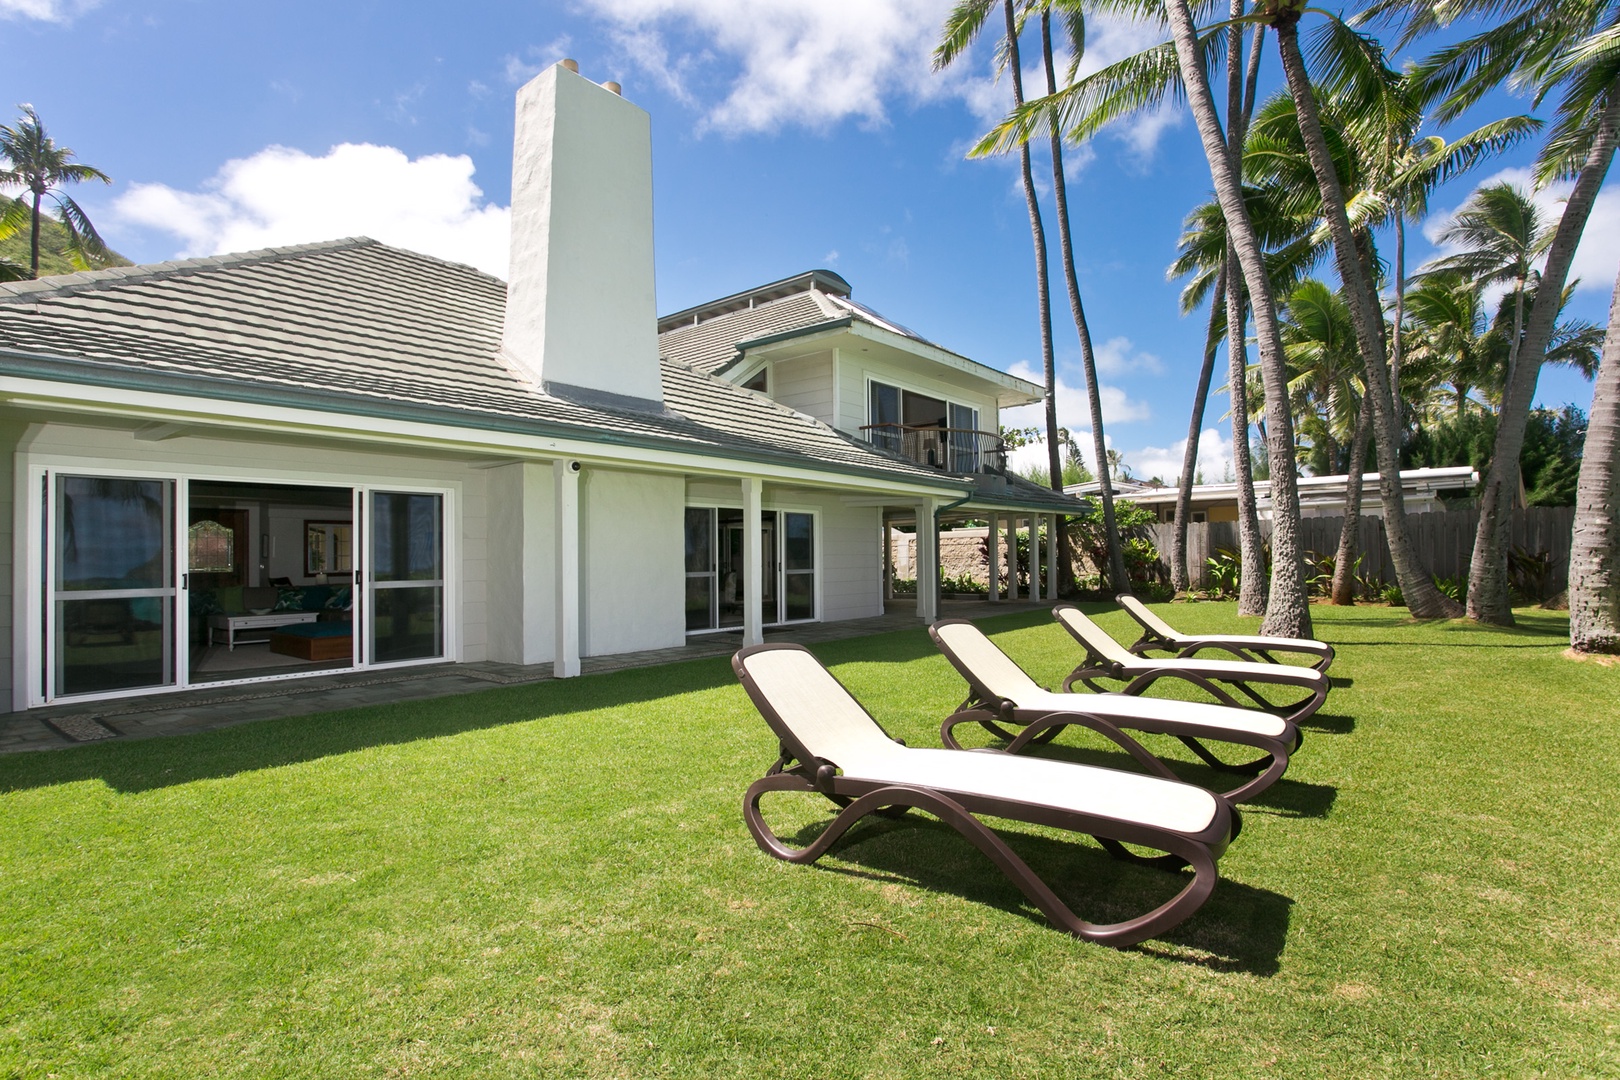 Kailua Vacation Rentals, Hale Melia* - Unwind on our yard's sun loungers and feel the tropical breeze.